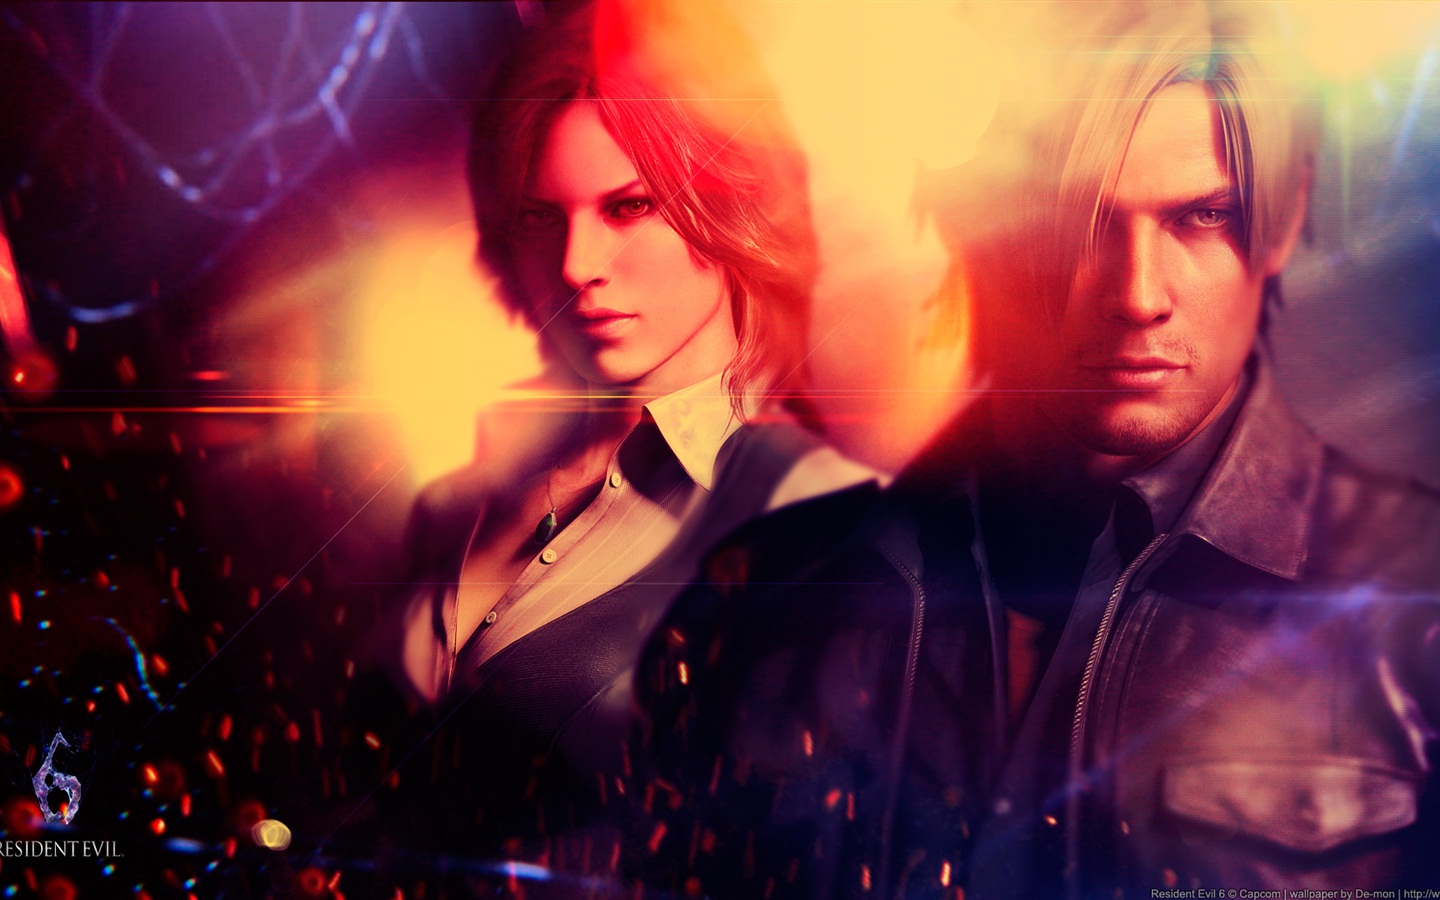 Resident Evil 6 HD game wallpapers #8 - 1440x900